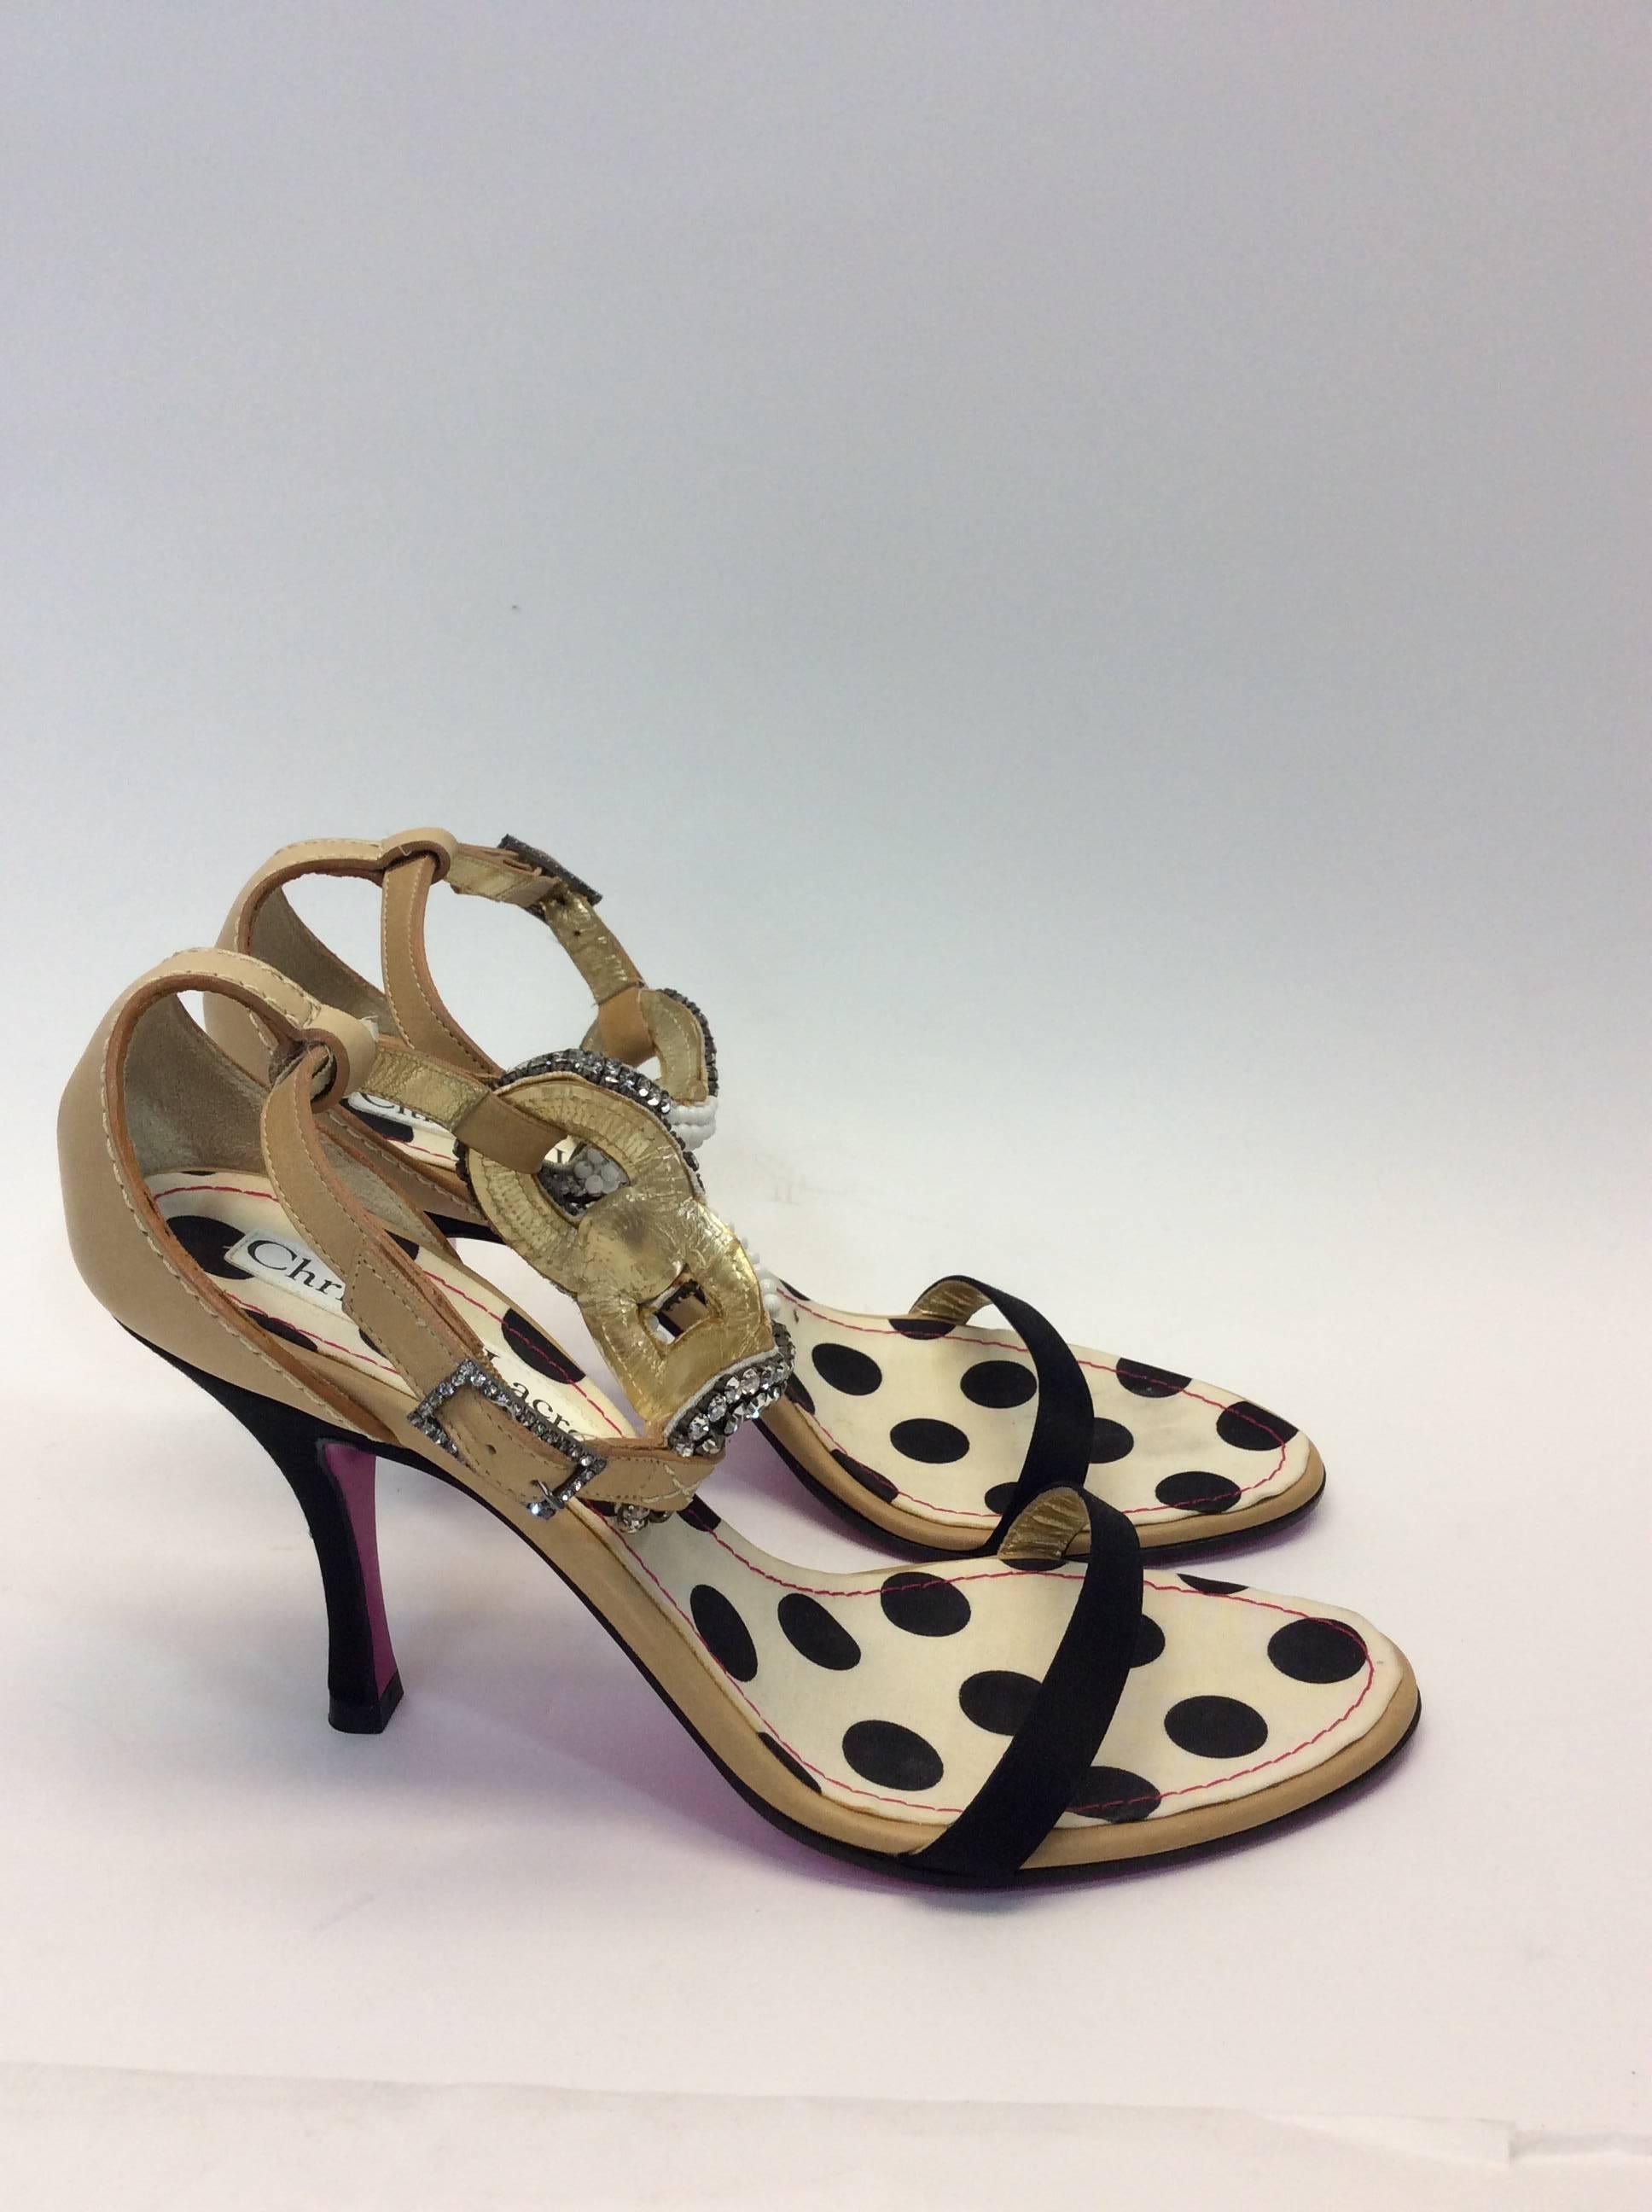 Christian Lacroix Rhinestone Beaded Strappy Heel In Excellent Condition For Sale In Narberth, PA